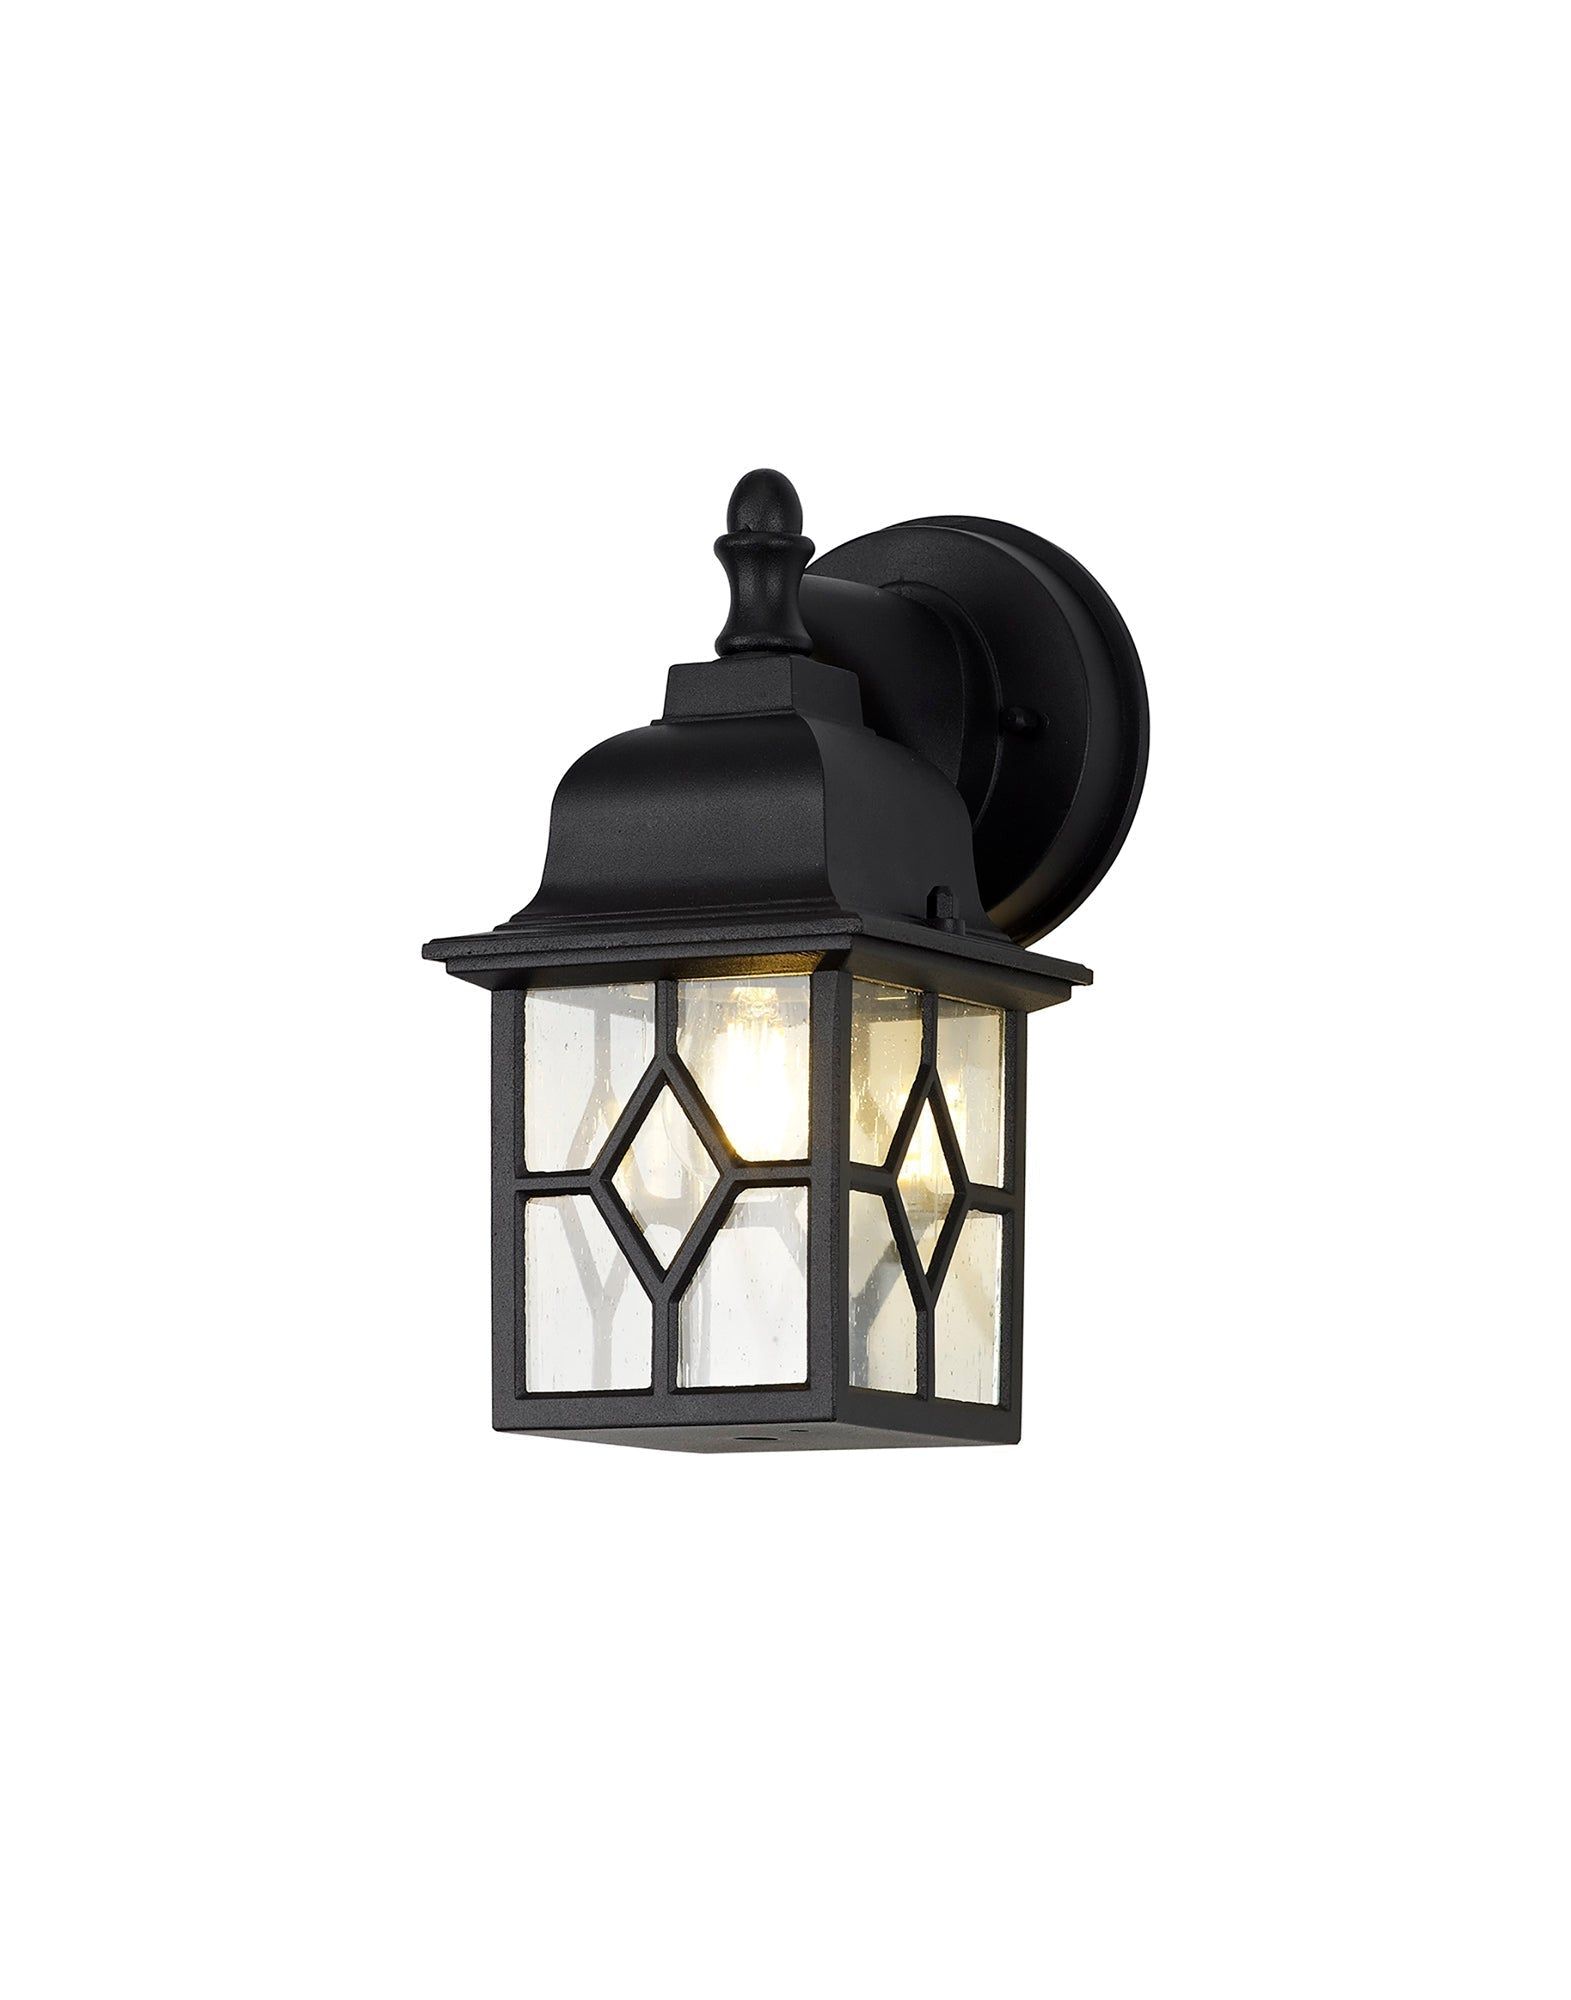 Alcovr Down Square Criss Cross Outdoor Wall Lamp, 1 x E27, IP44, Sand Black/Clear Seeded Glass, 2yrs Warranty